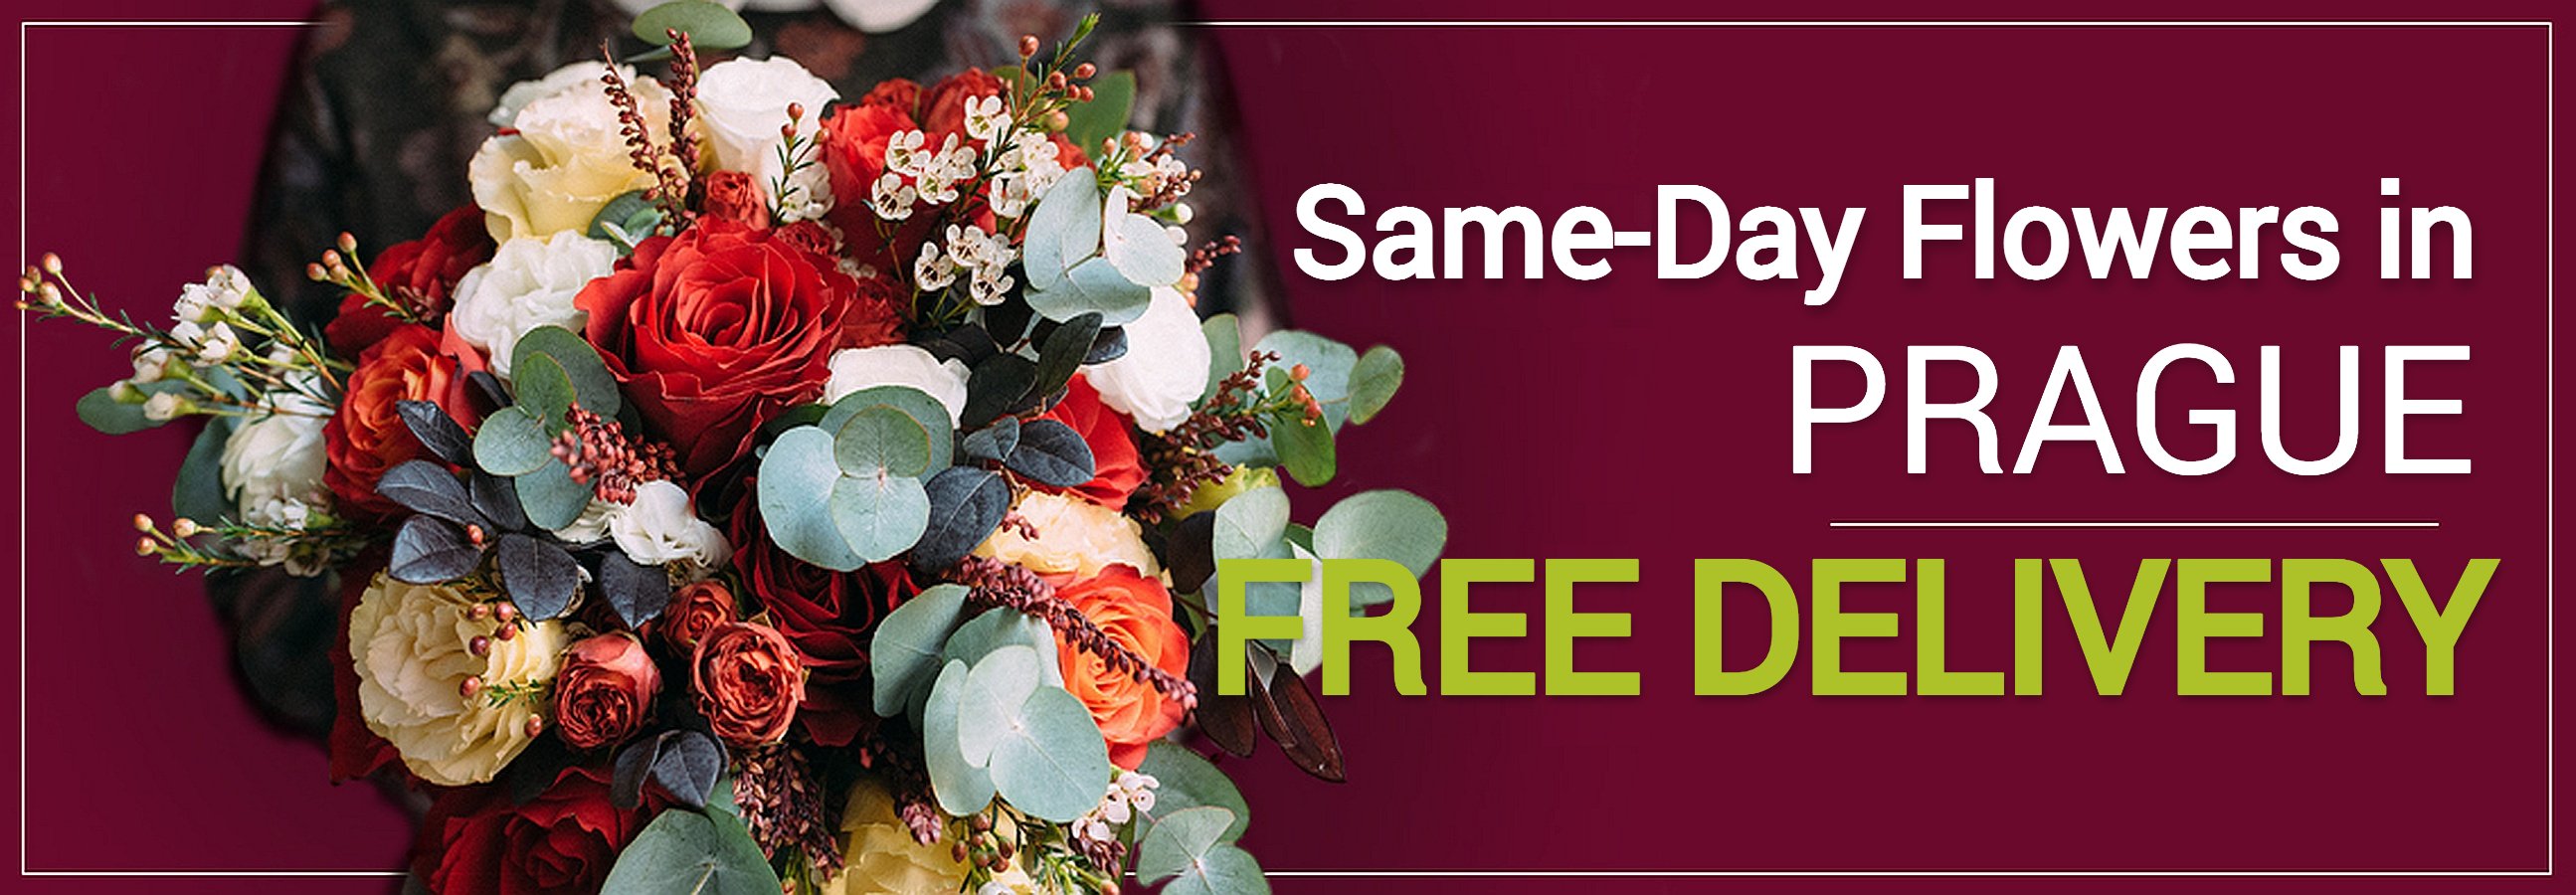 Free same-day flowers delivery in Prague | City Fleur